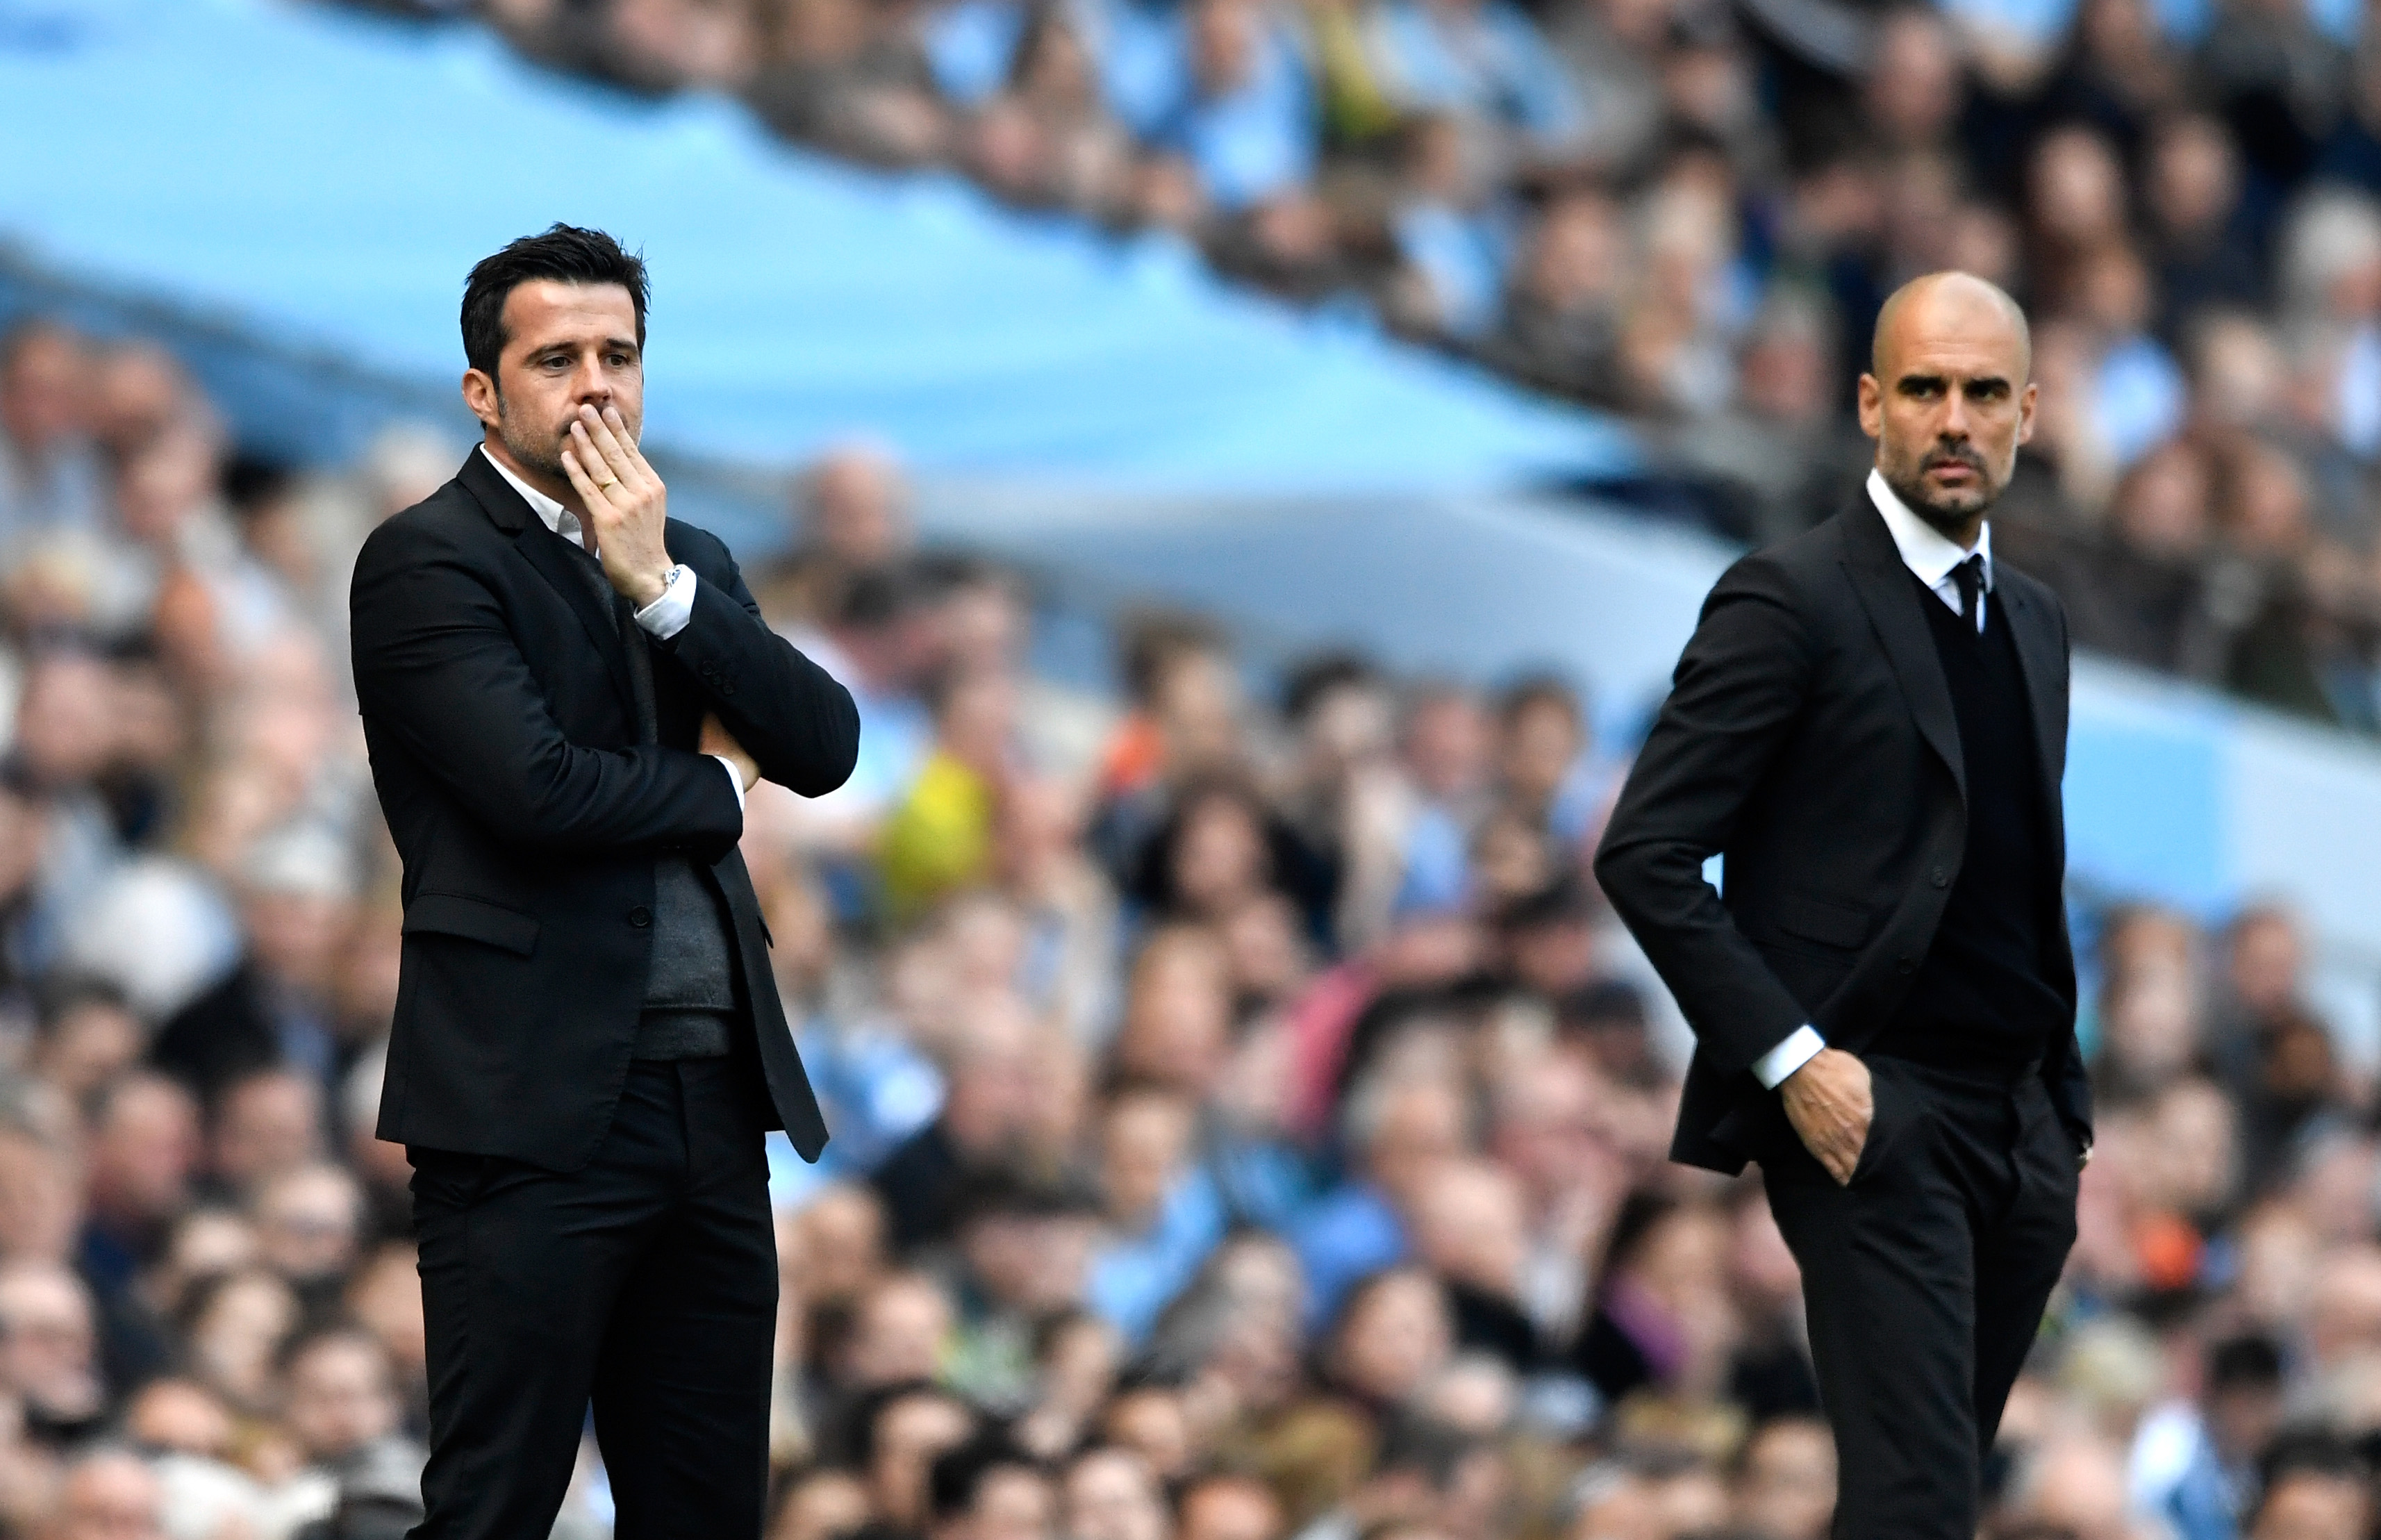 MANCHESTER, ENGLAND - APRIL 08: Marco Silva, Manager of Hull City (L) and Josep Guardiola, Manager of Manchester City (R) look on during the Premier League match between Manchester City and Hull City at Etihad Stadium on April 8, 2017 in Manchester, England.  (Photo by Stu Forster/Getty Images)